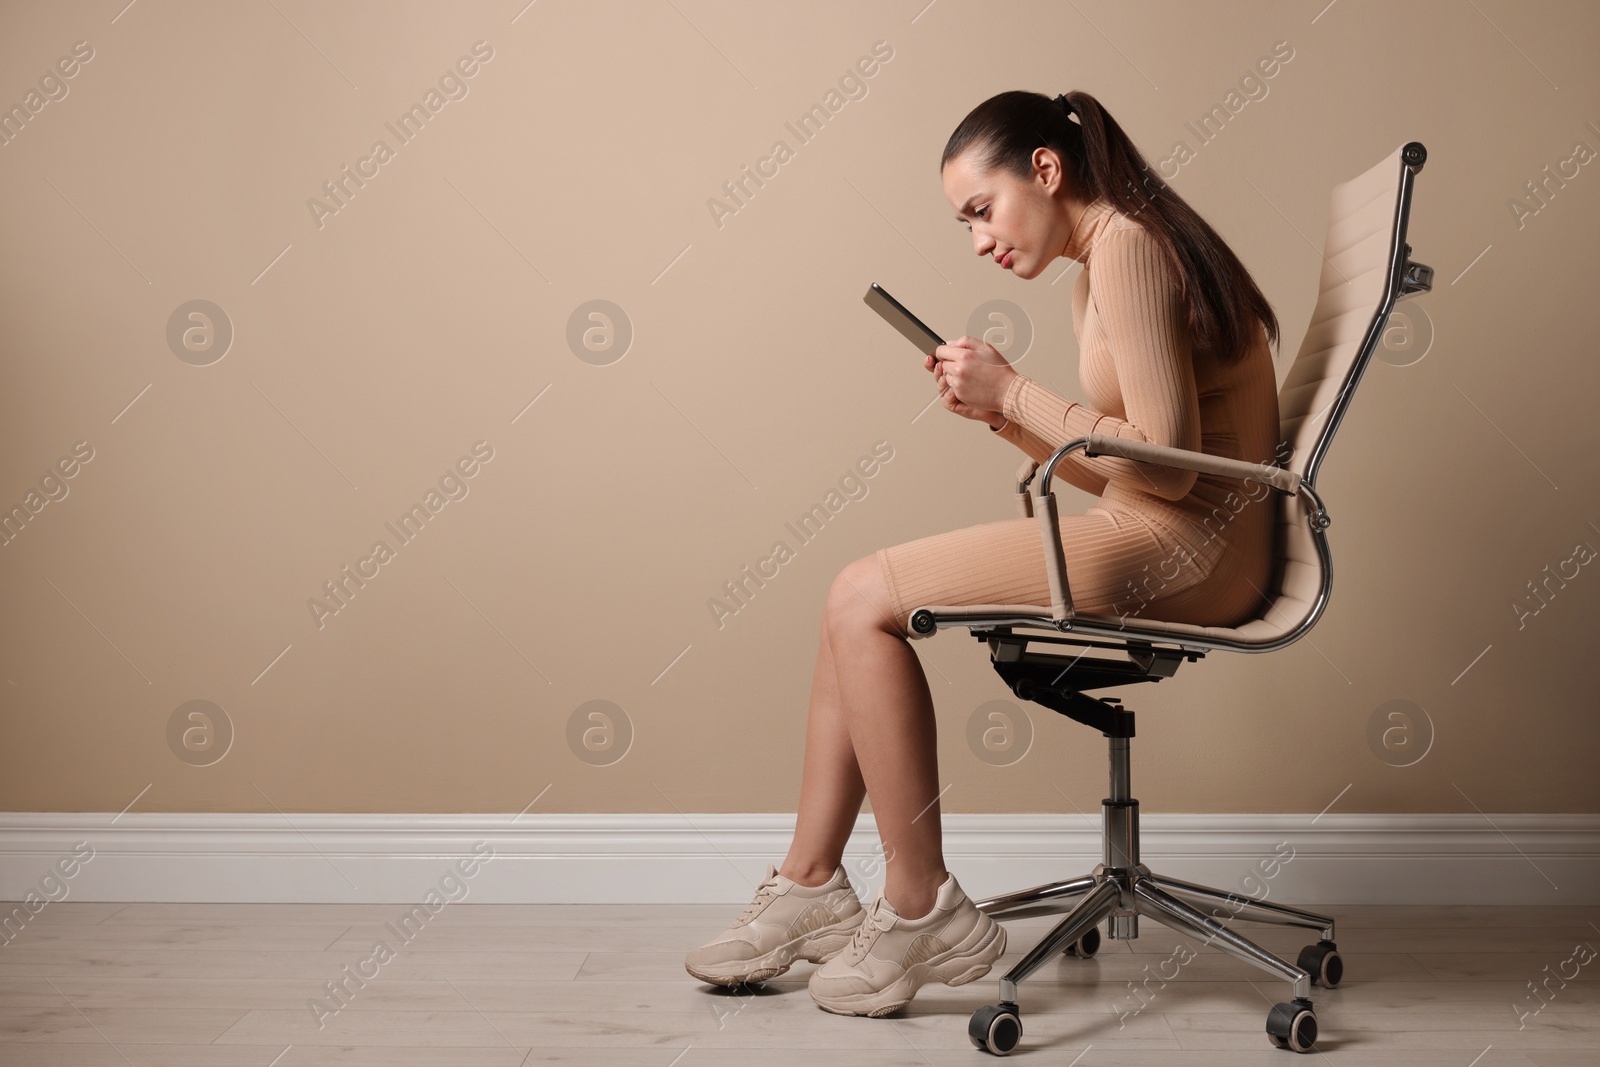 Photo of Young woman with poor posture using tablet while sitting on chair near beige wall, space for text